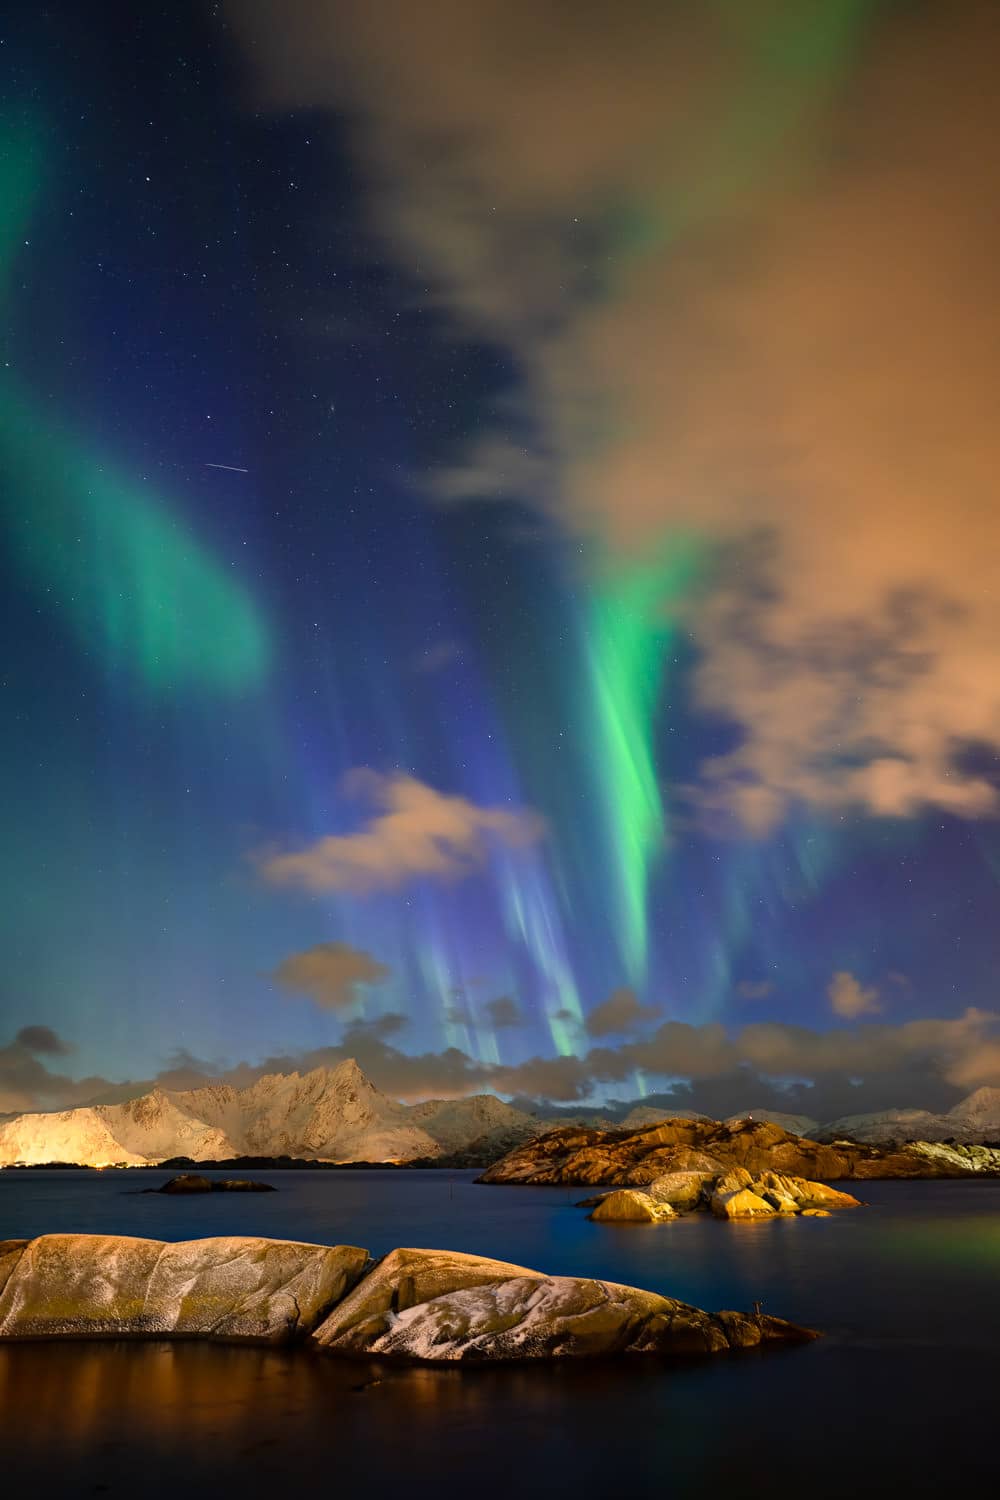 Aurora Over Ballstad Norway with Sony 20mm f/1.8 G Lens